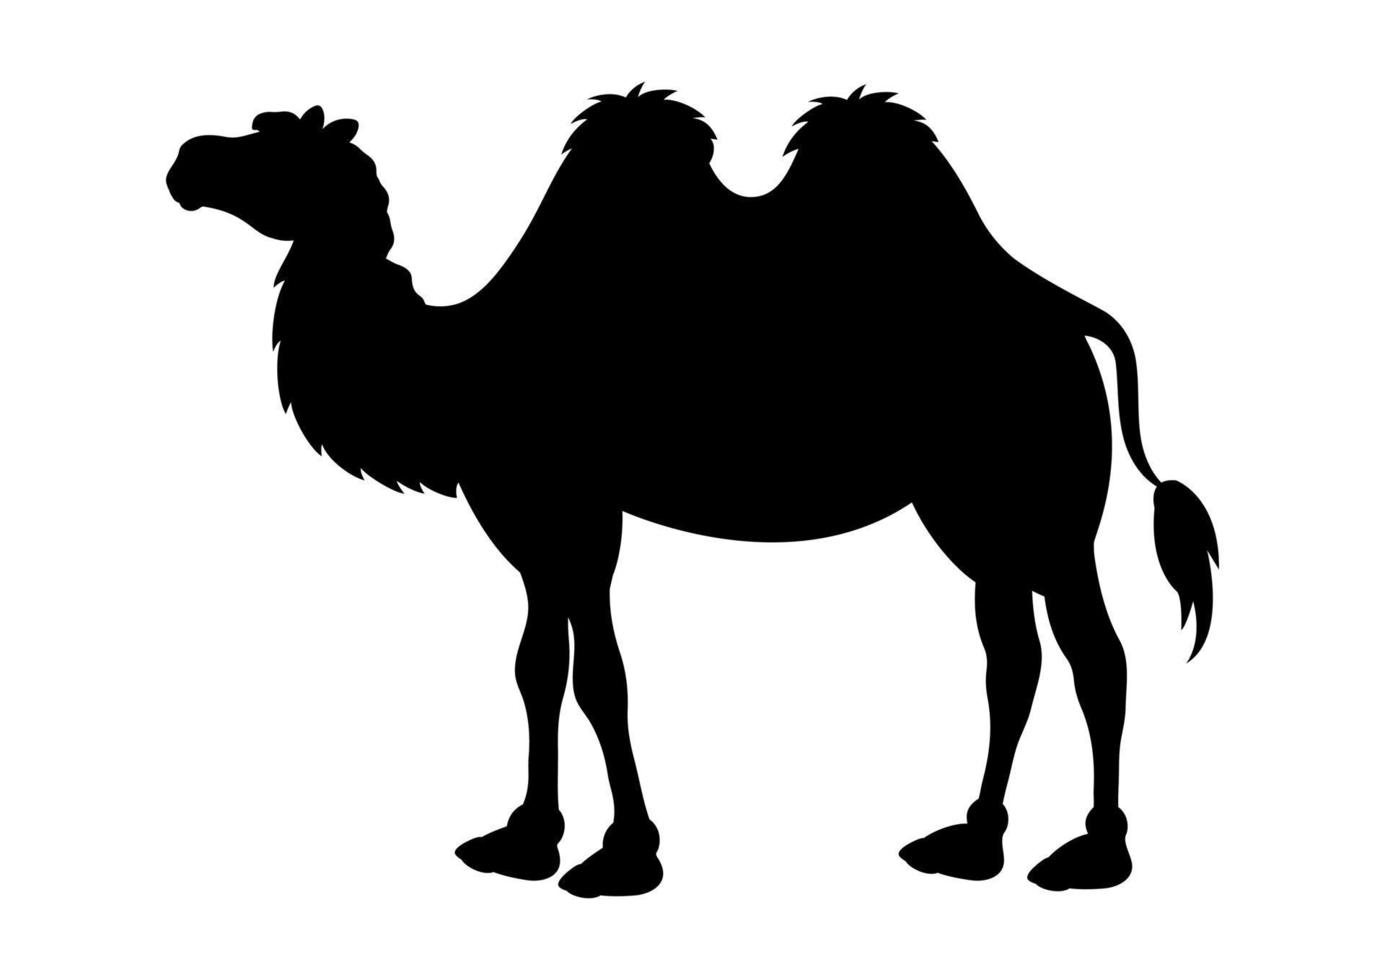 Silhouette of a camel. Black camel silhouette on white background vector